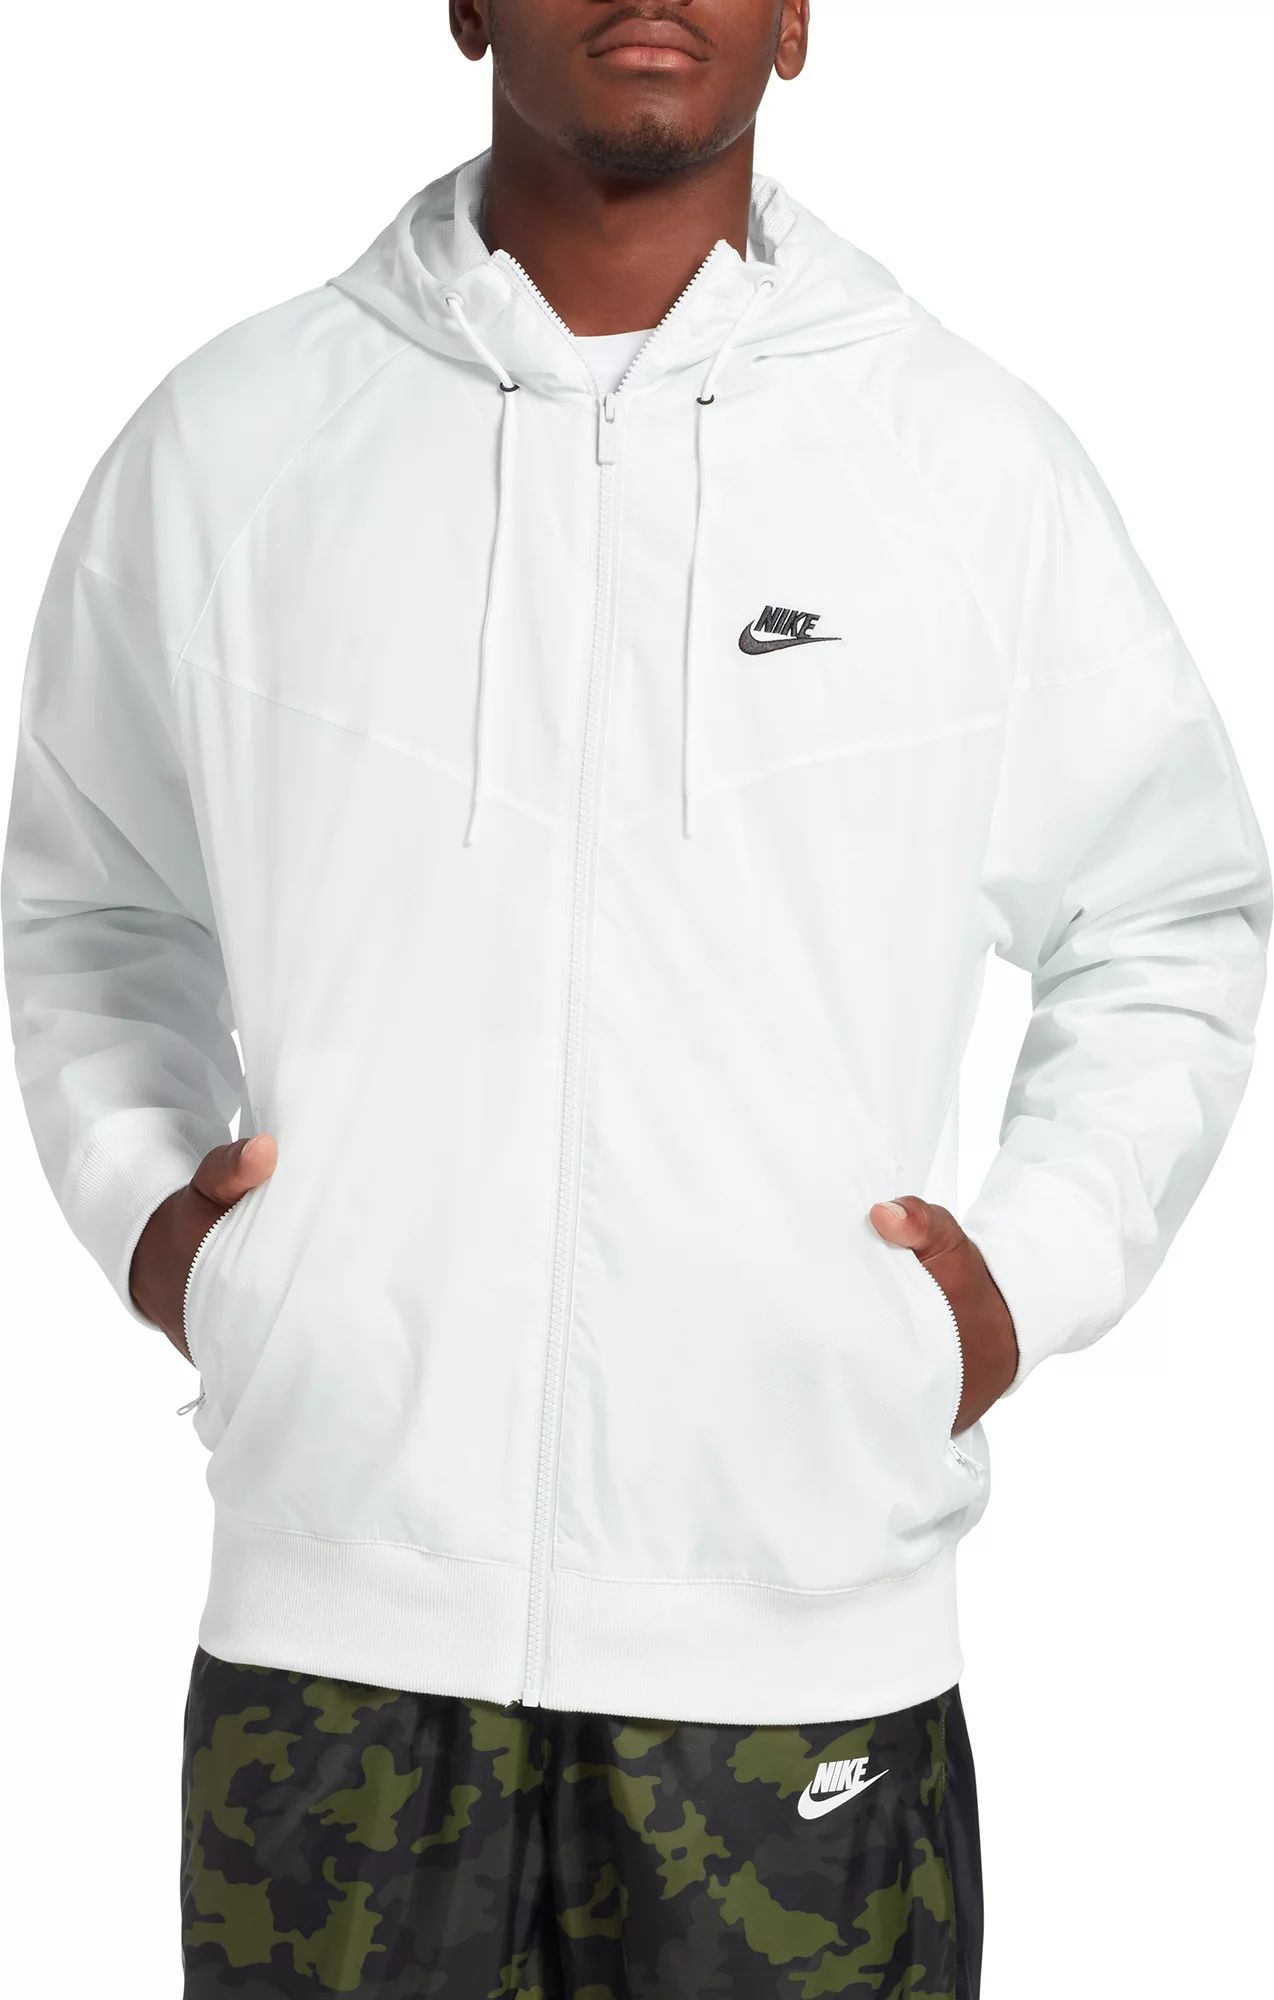 Nike Men's Sportswear 2019 Hooded Windrunner Jacket, Size: Small, Smmit Whte/Smmit Whte/Blk | Dick's Sporting Goods